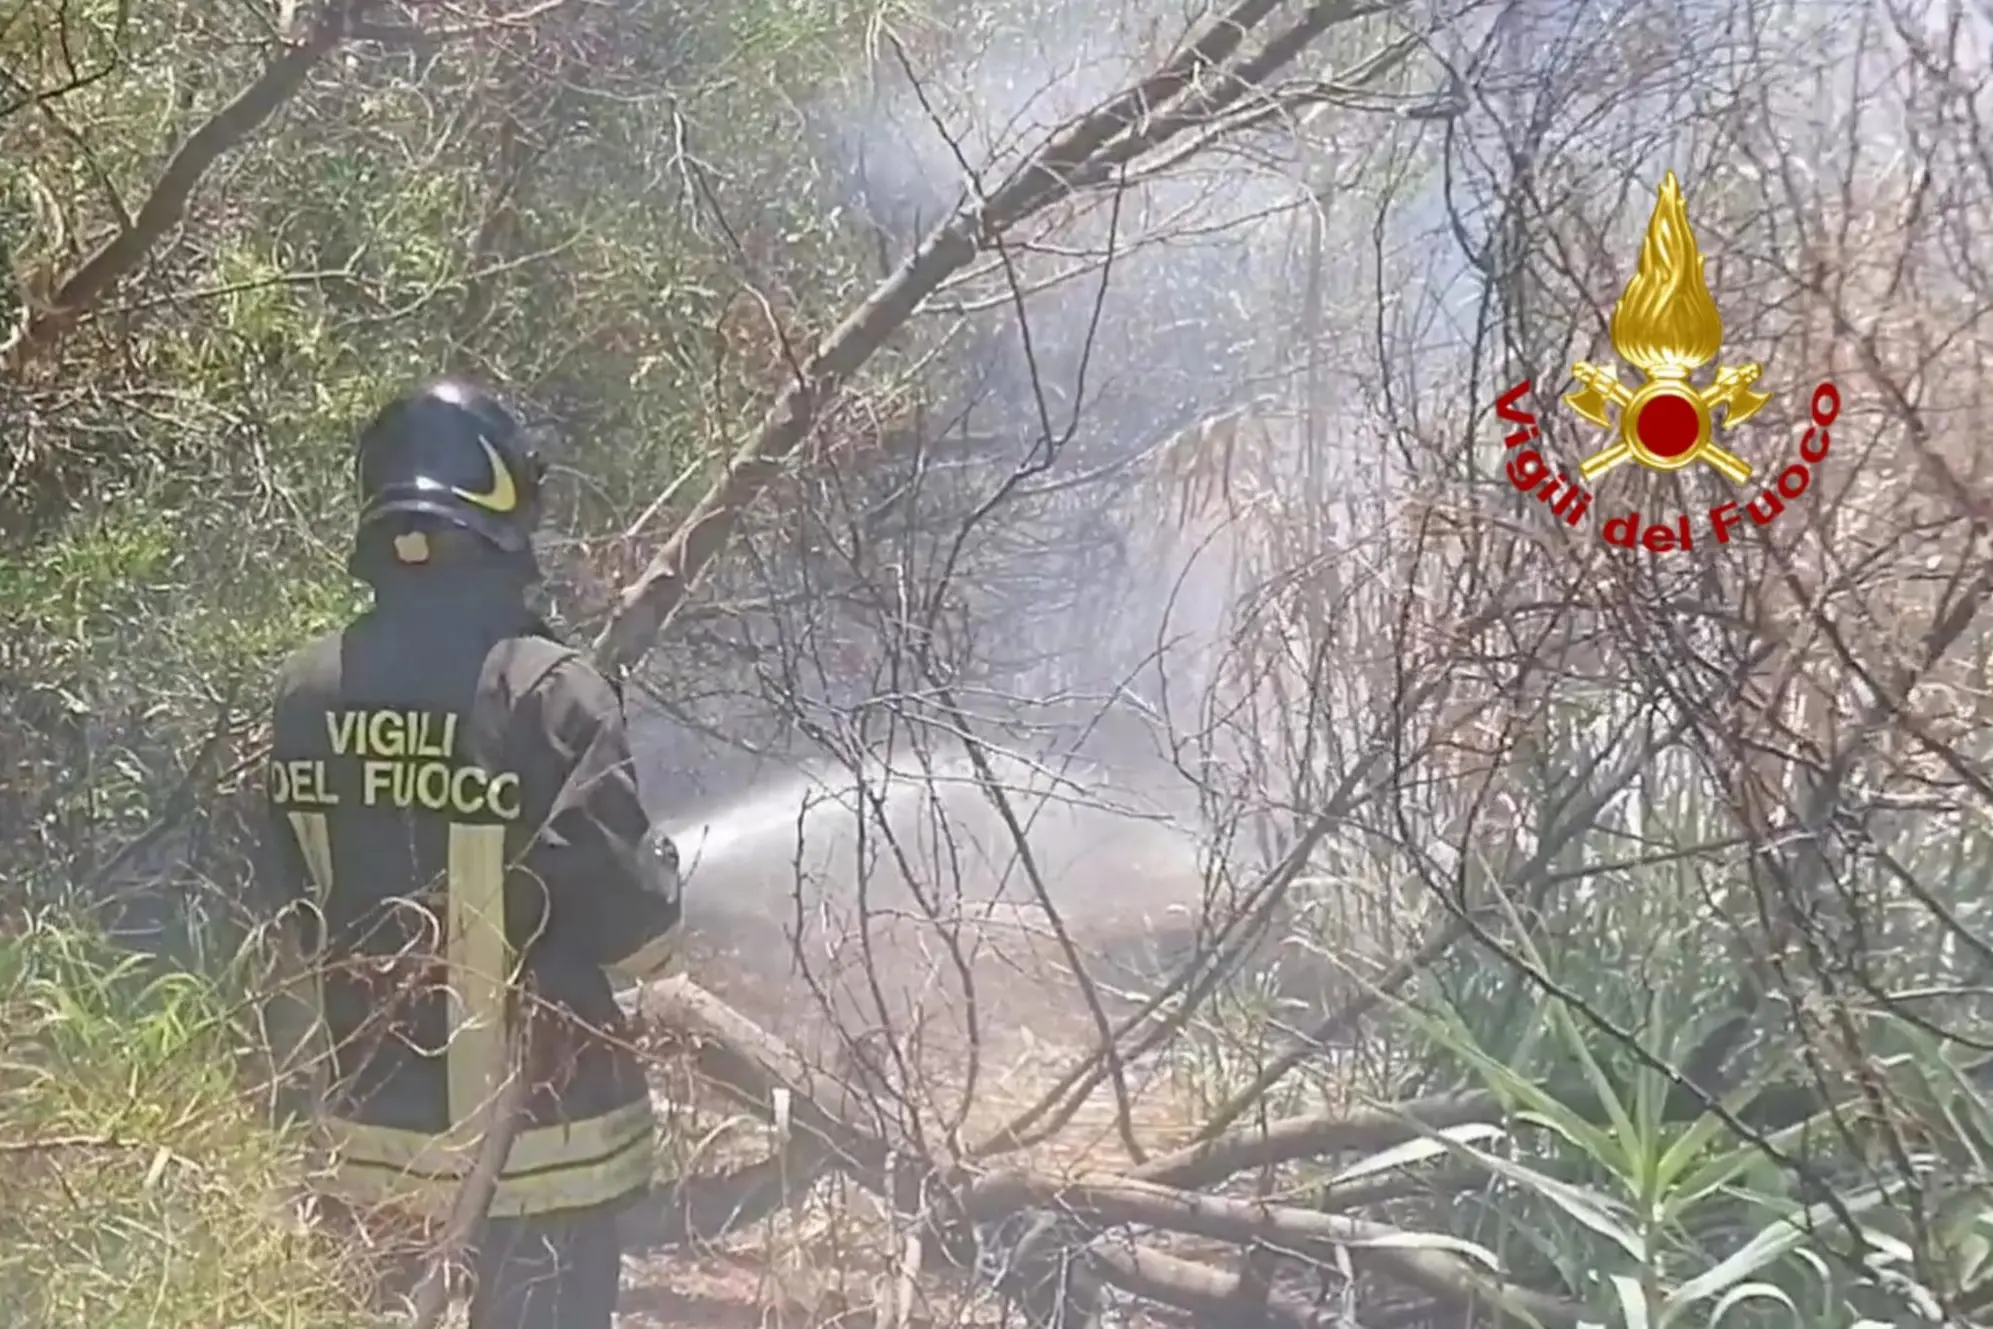 Day of fires in the Cagliari area (photo by the Fire Brigade)